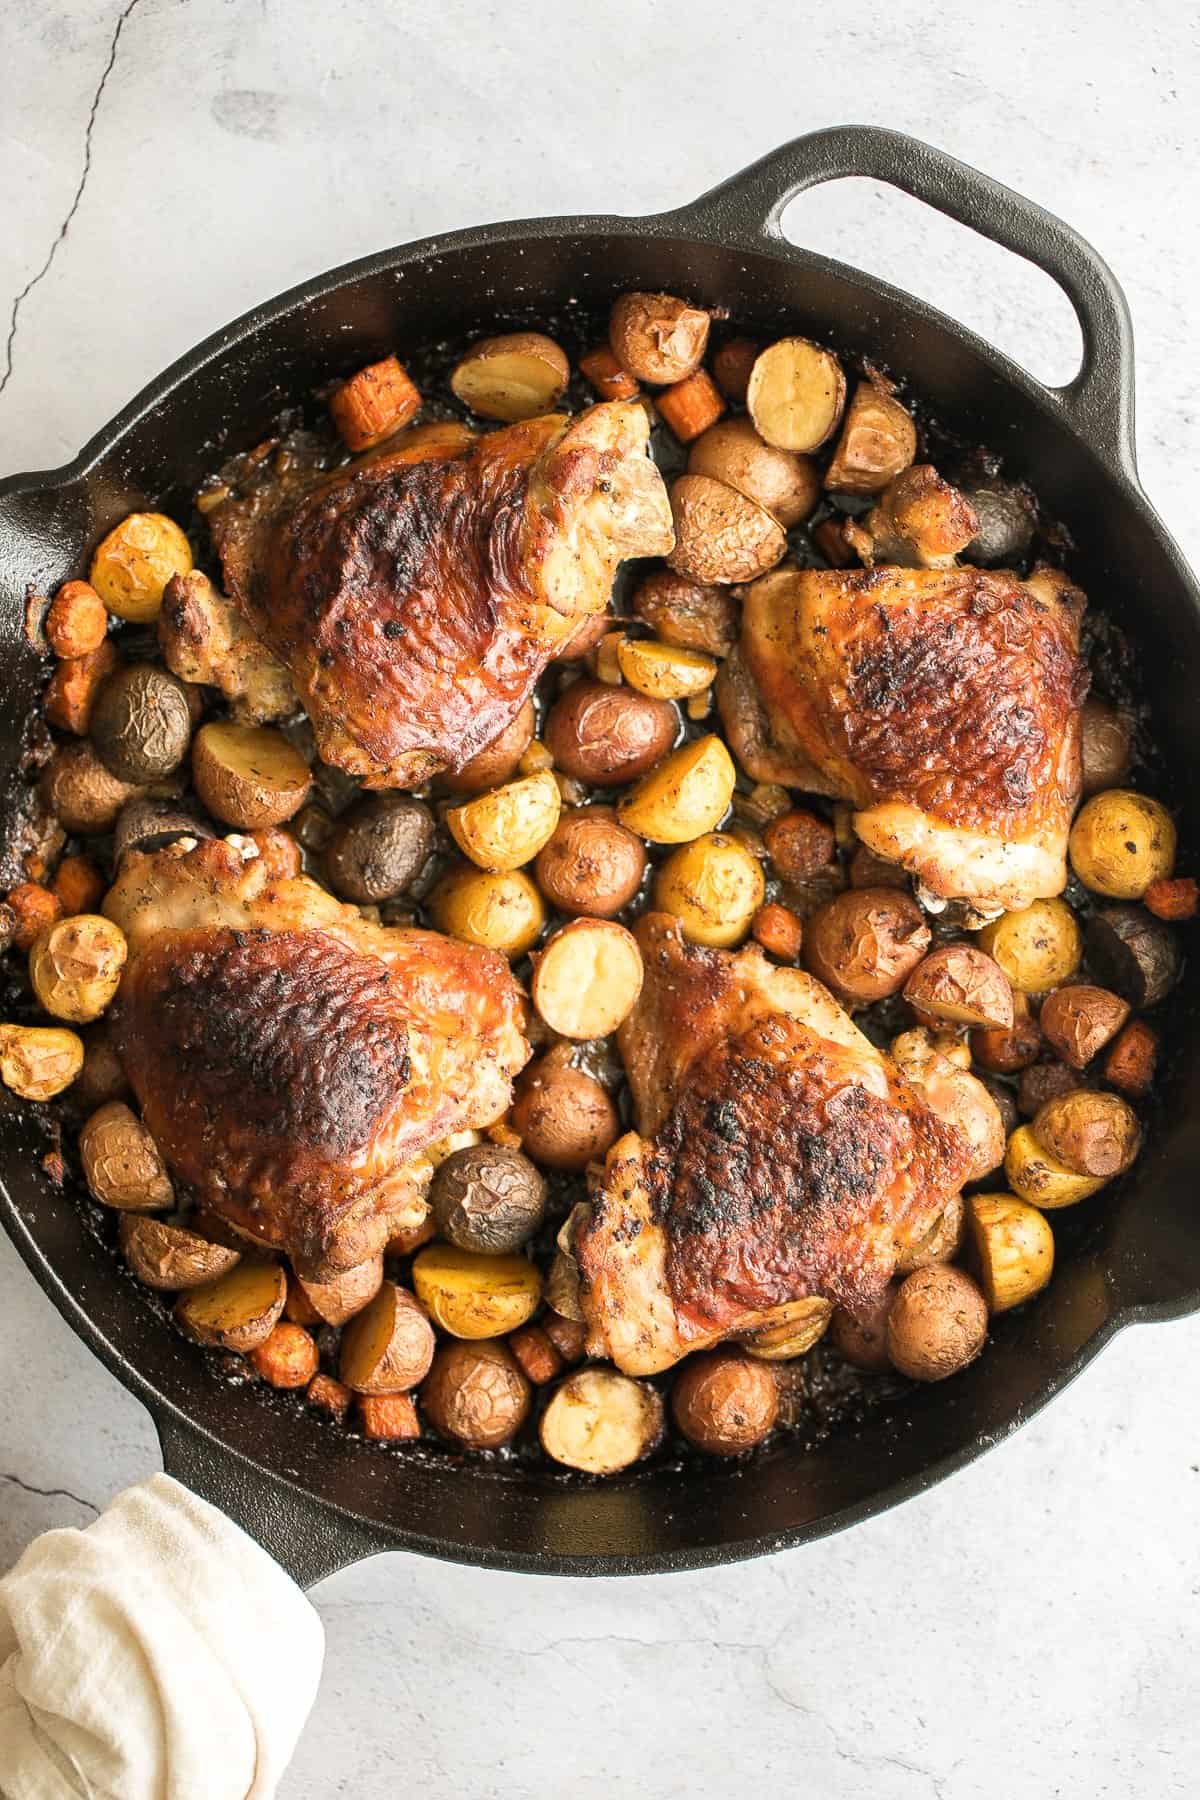 https://www.aheadofthyme.com/wp-content/uploads/2020/09/skillet-chicken-thighs-and-potatoes.jpg